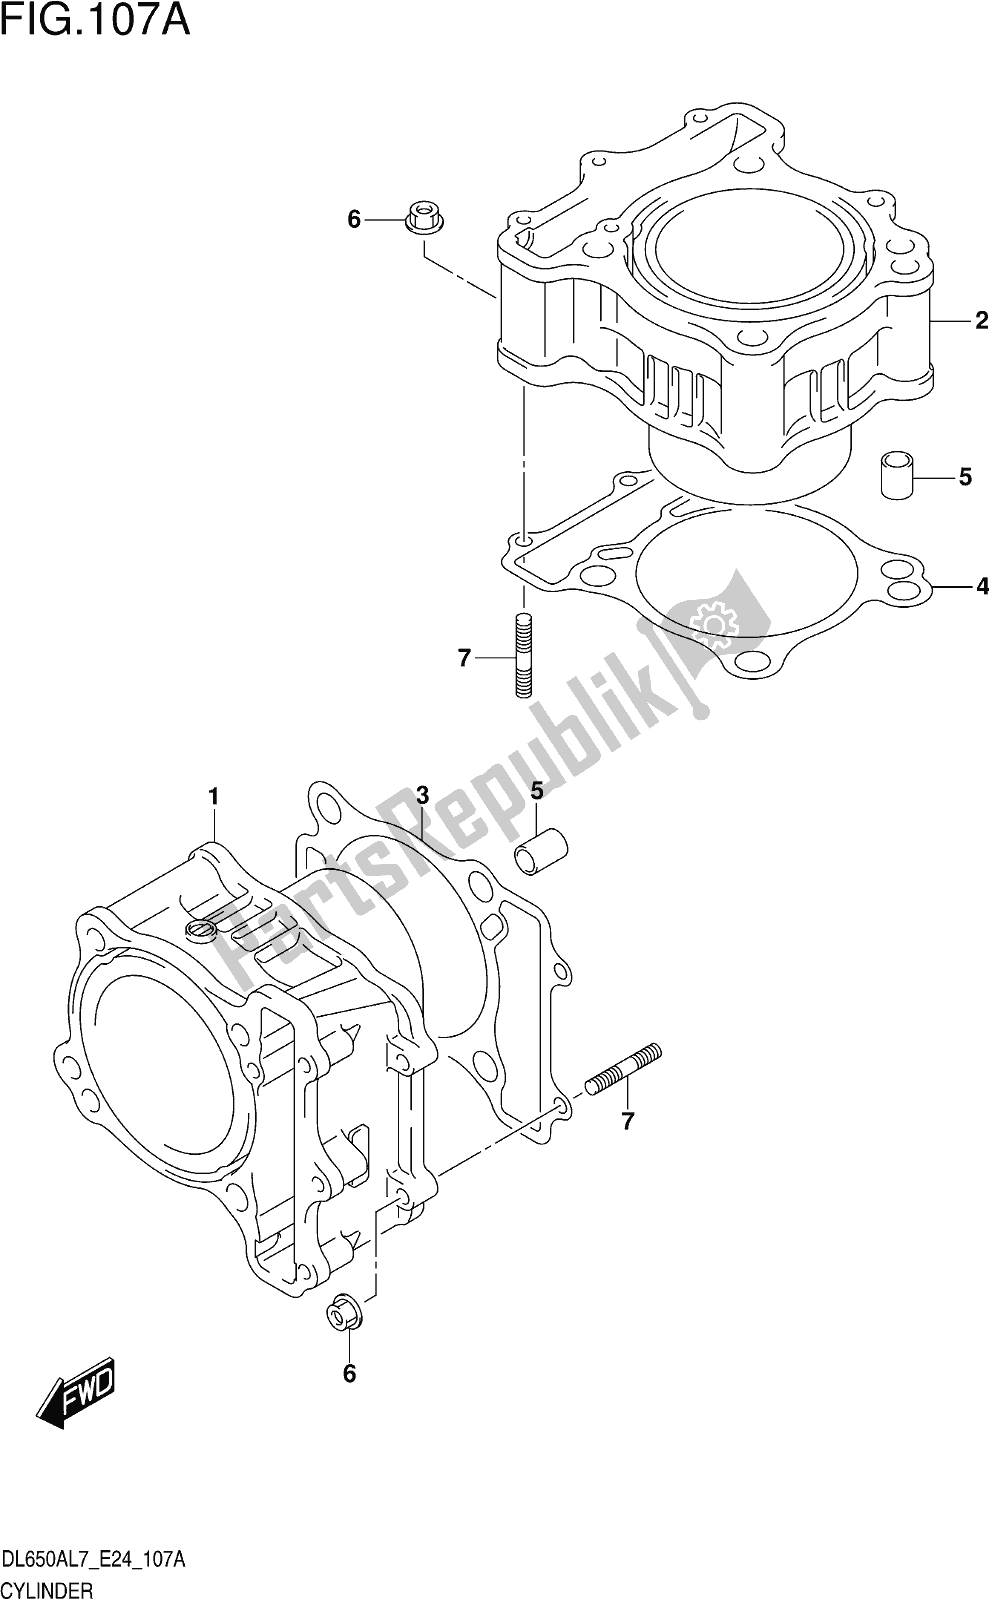 All parts for the Fig. 107a Cylinder of the Suzuki DL 650 Xaue V Strom 2017